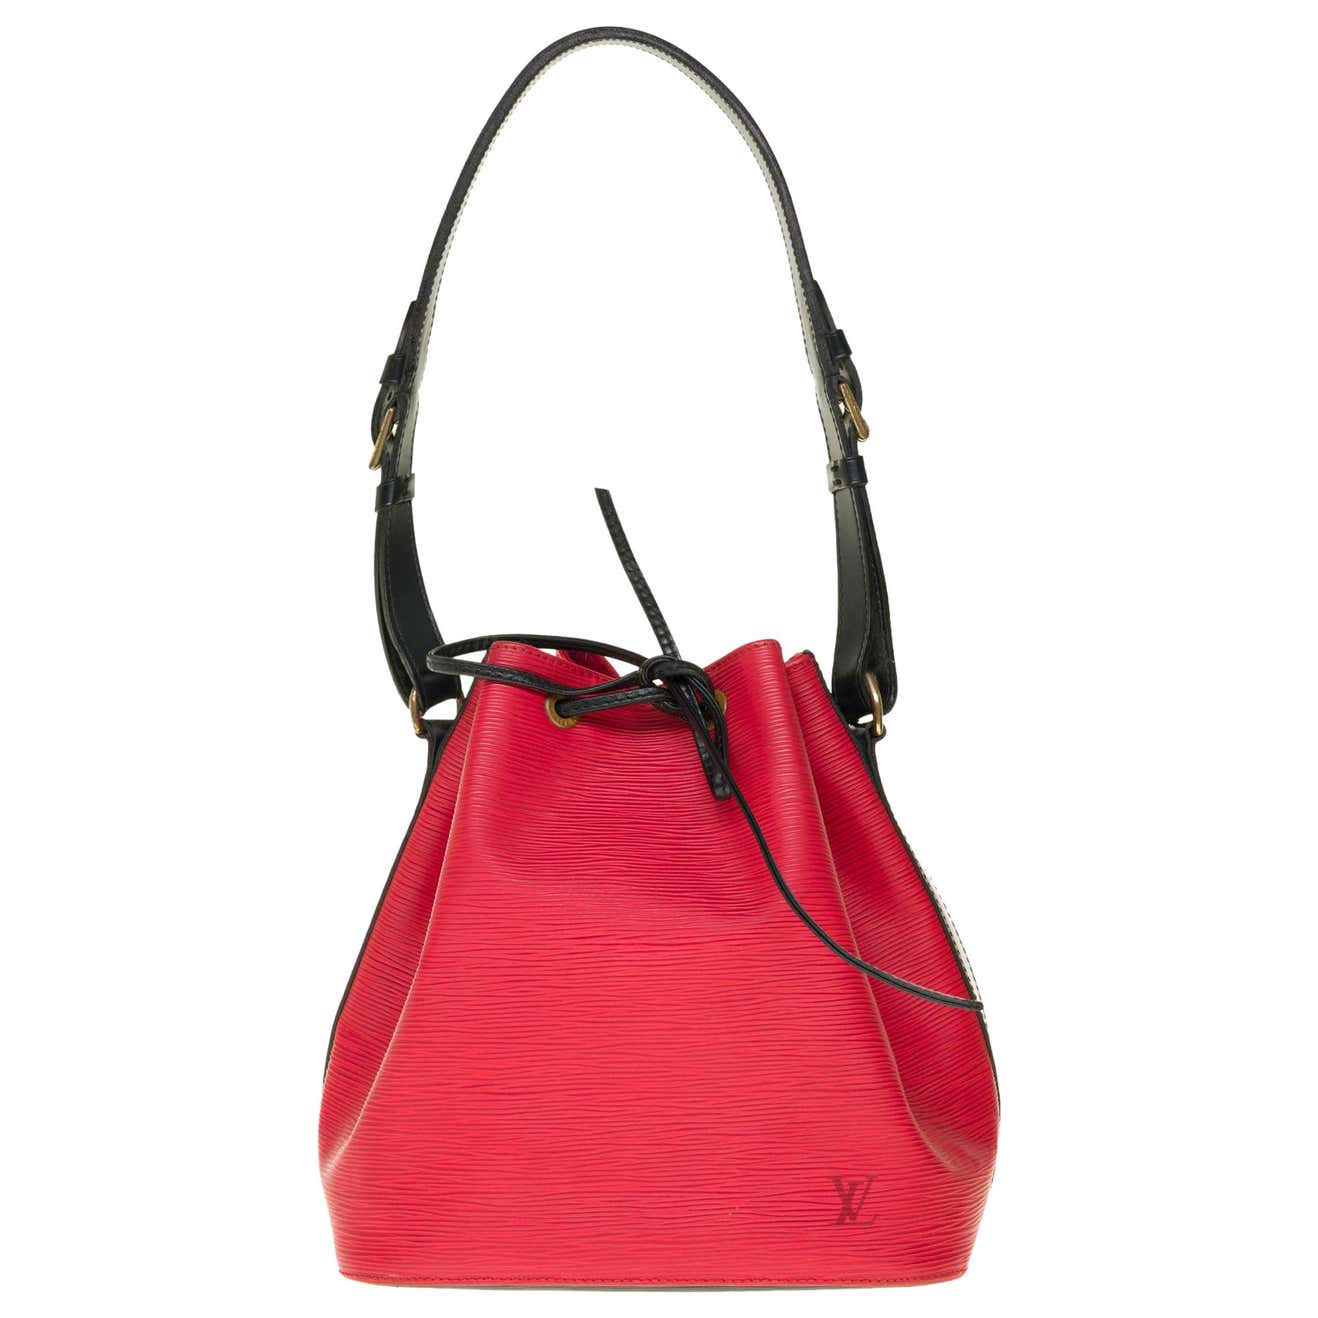 Louis Vuitton Noé PM shoulder bag in red and black epi leather, gold ...